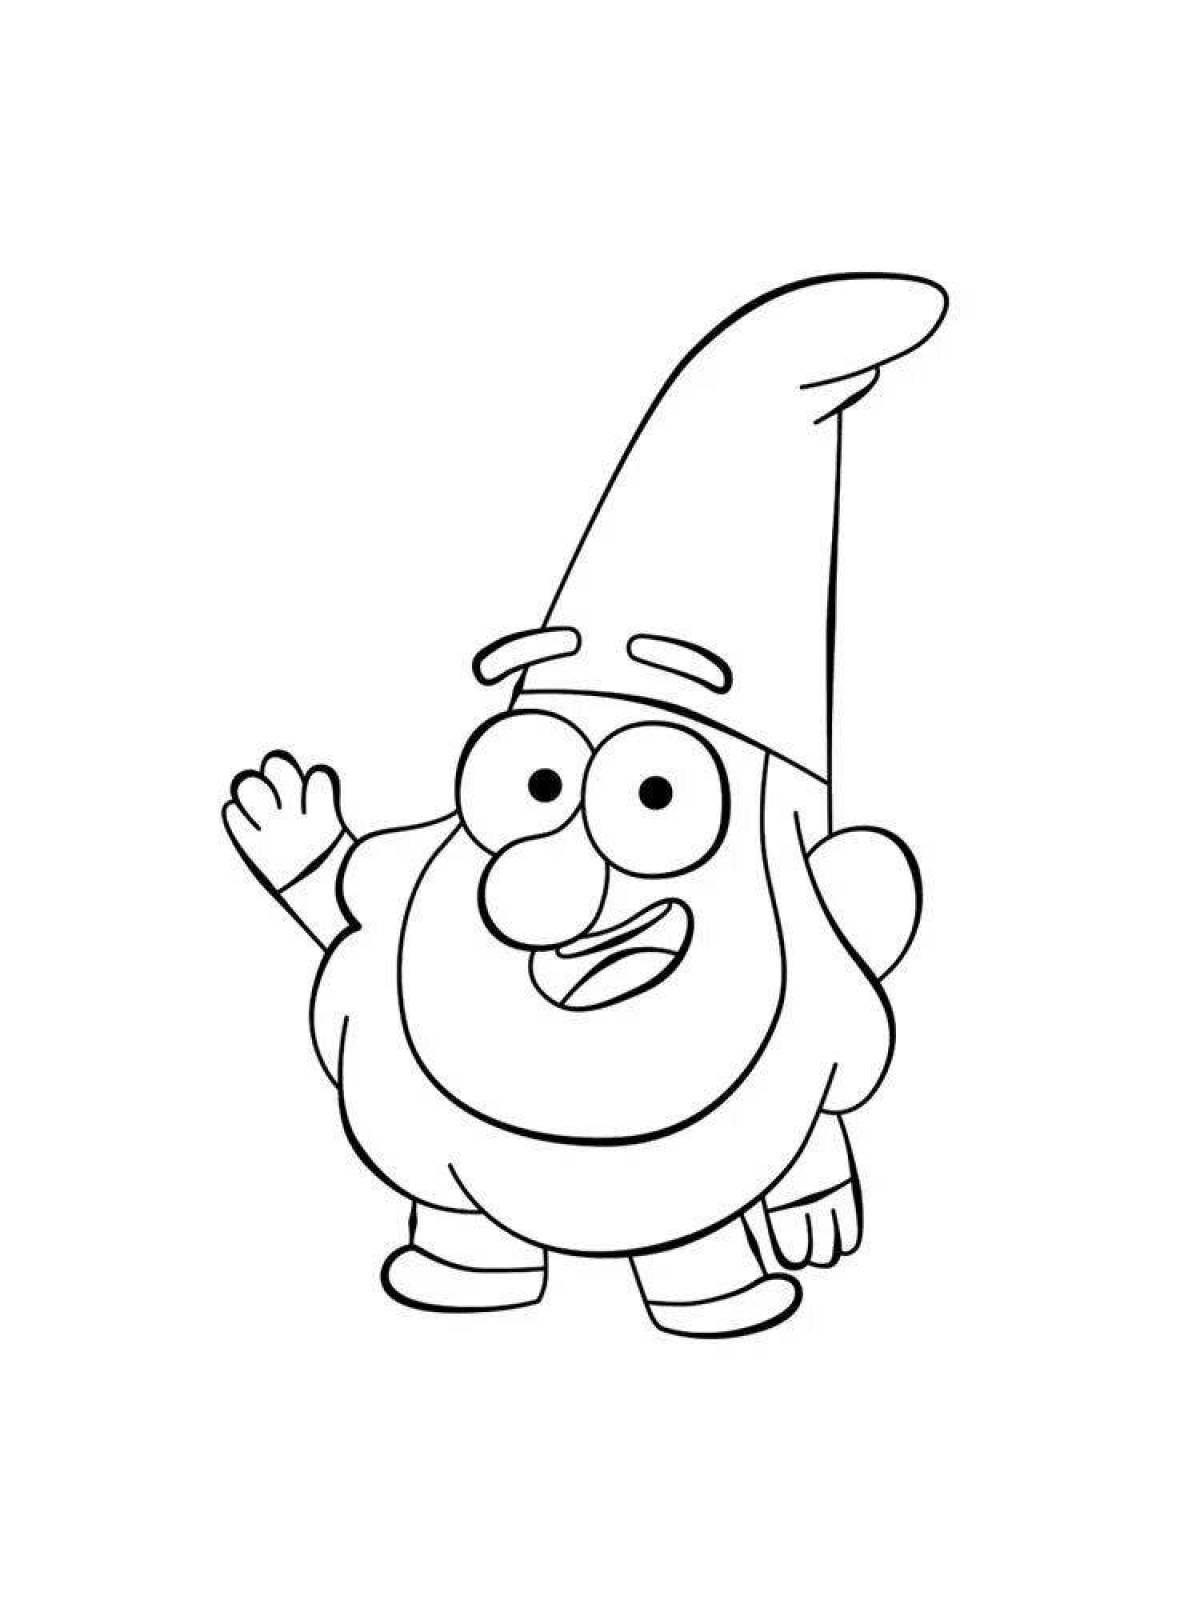 Gravity falls flickering light coloring page